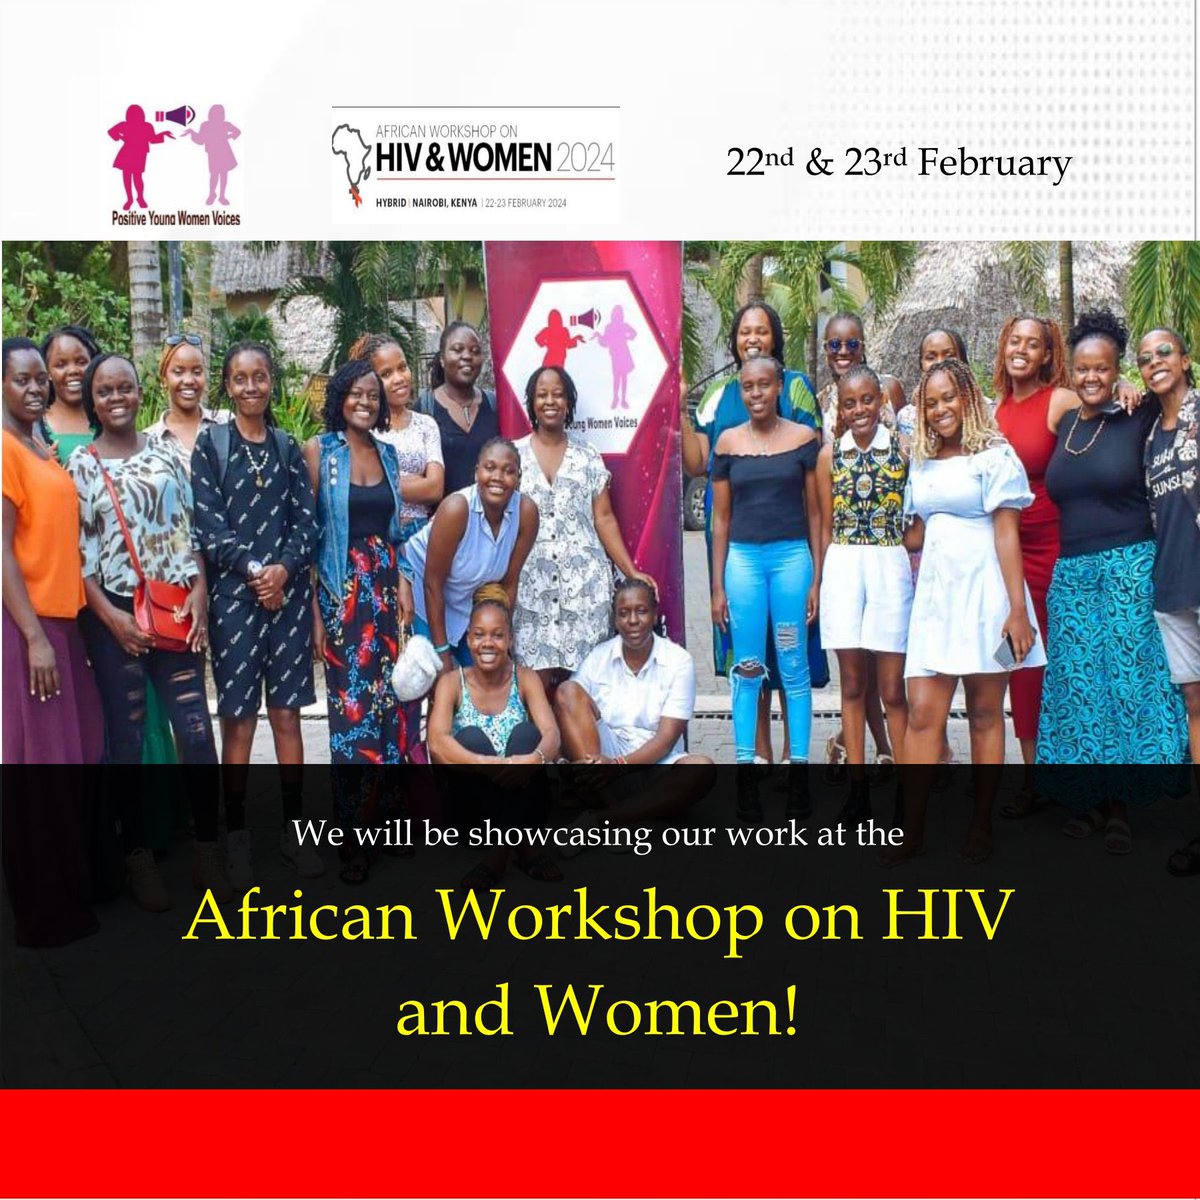 I am so excited to be part of the first ever African Workshop on @HIV_and_Women happening here in Nairobi this week. #HIVandWomen2024 @GirlsWomenPower @MakingWavesNet @SalamanderTrust